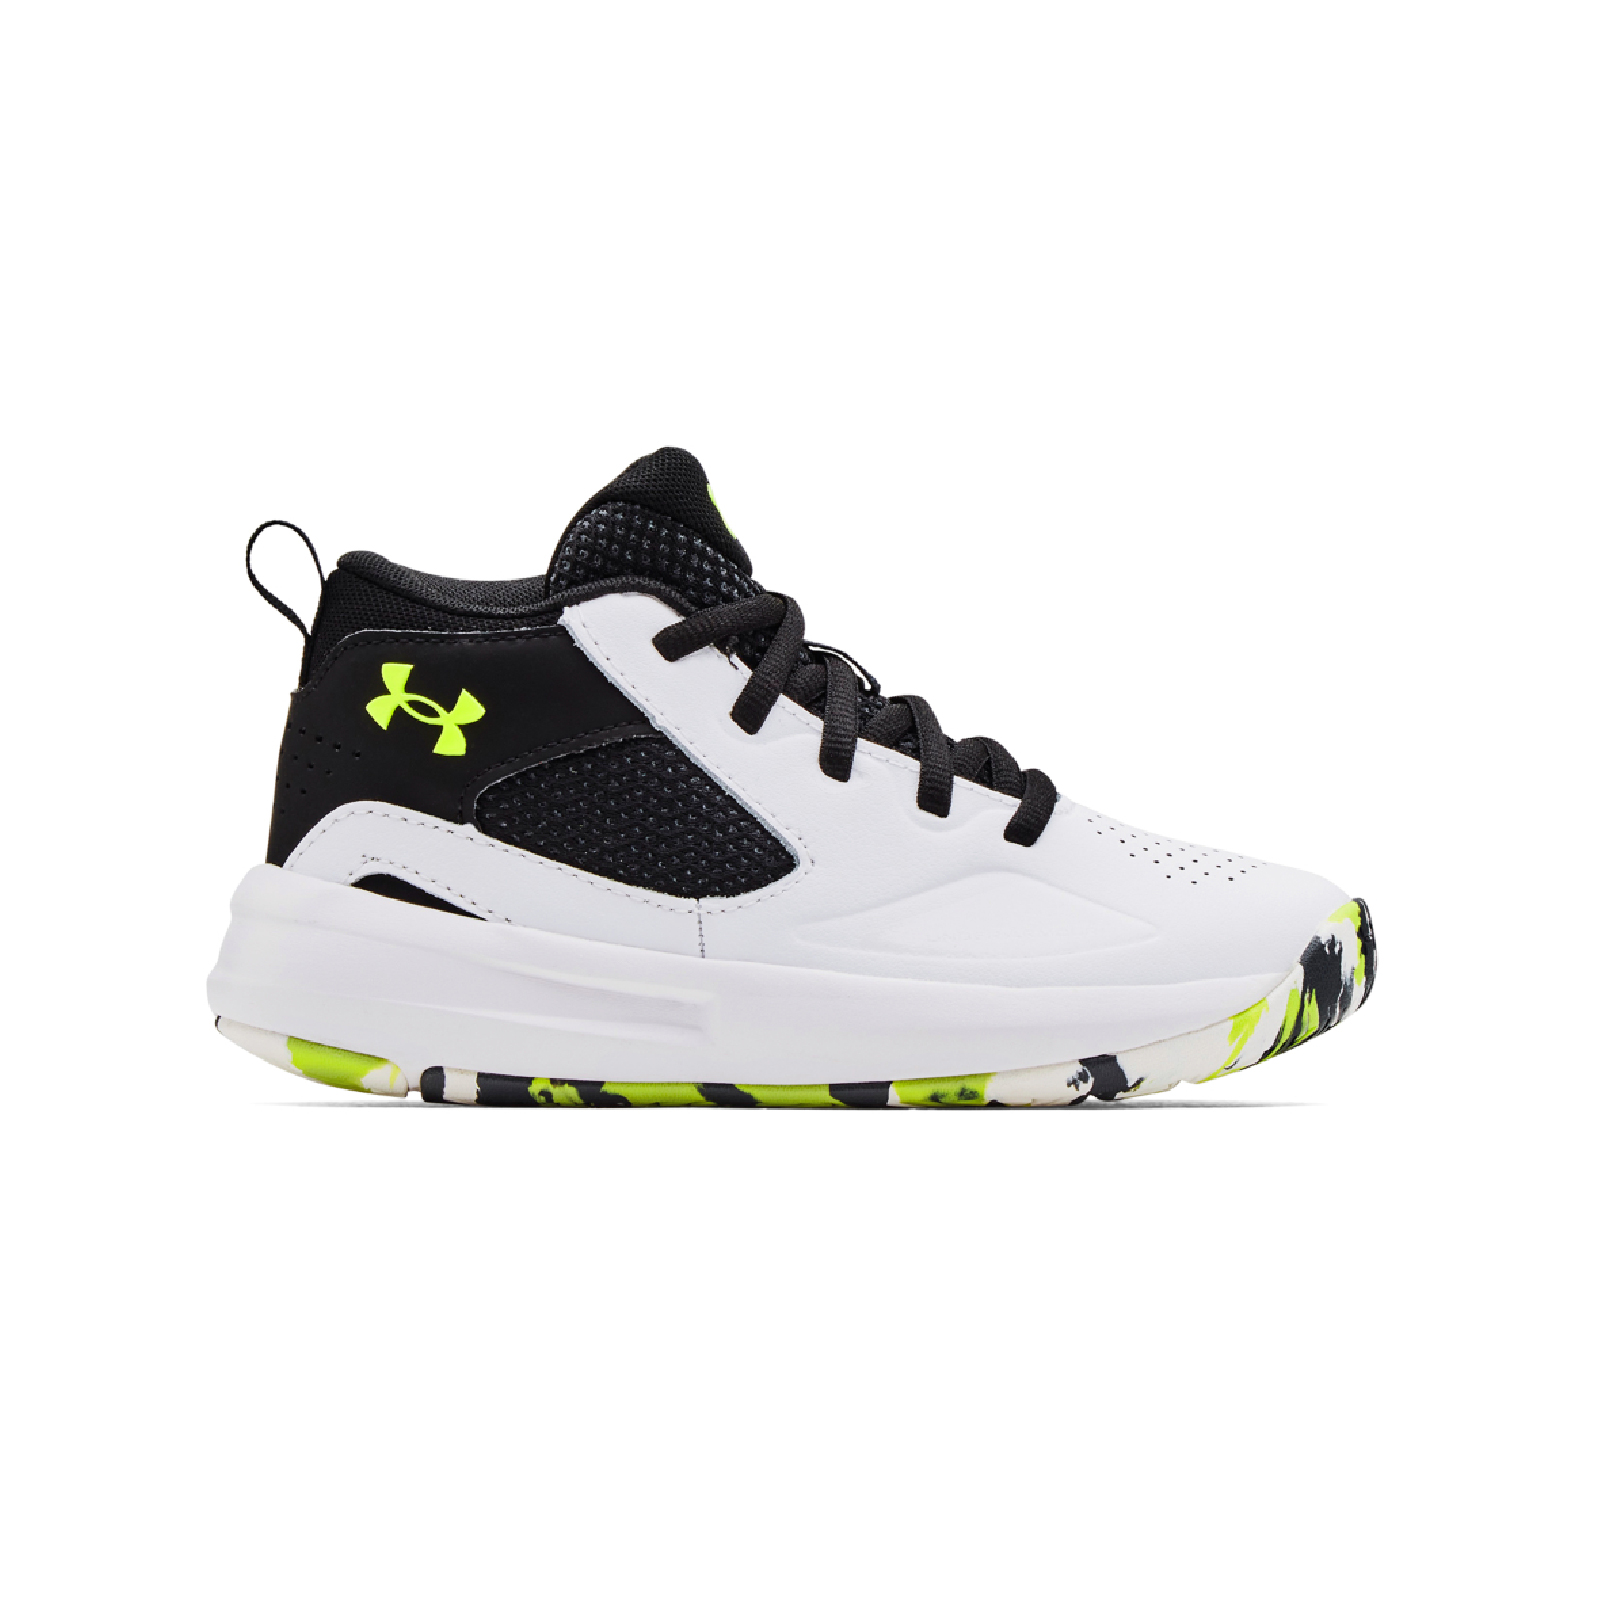 Under Armour - 3023534 UA PS LOCKDOWN 5 - 102/9373 Παιδικά > Παπούτσια > Αθλητικά > Παπούτσι Mid Cut